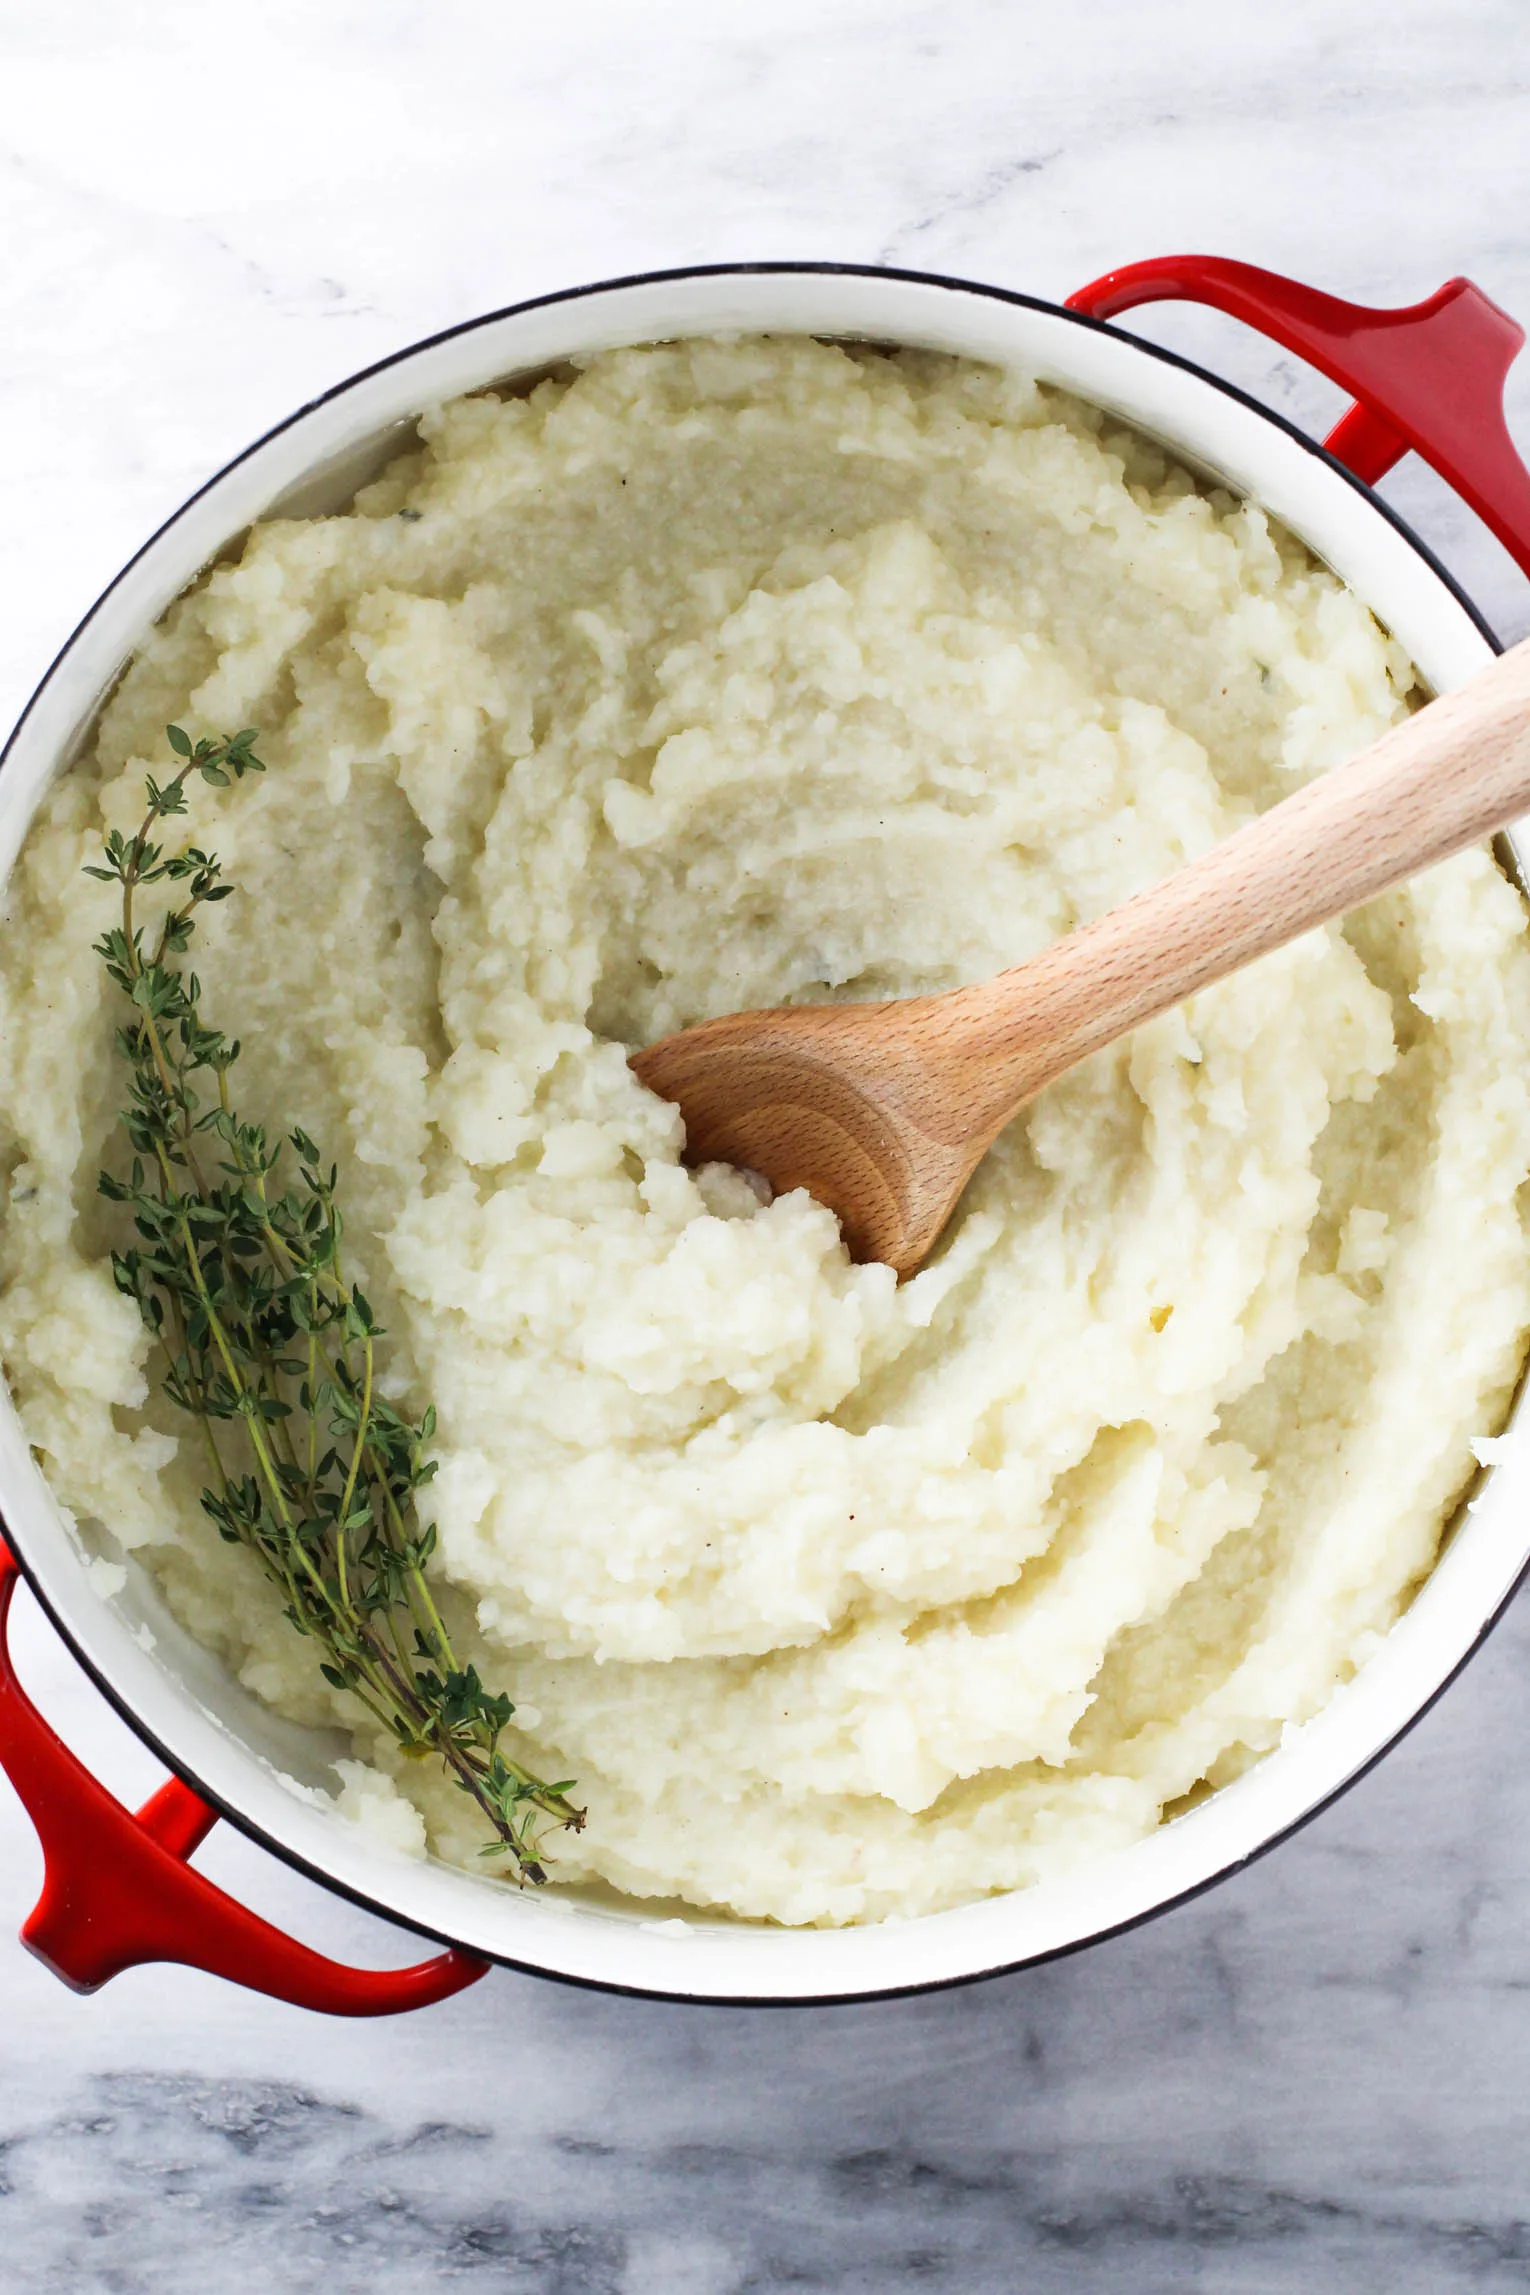 Potato and cauliflower mash in a pot with a wooden spoon in it. Thyme sprigs on the left side of the mash.